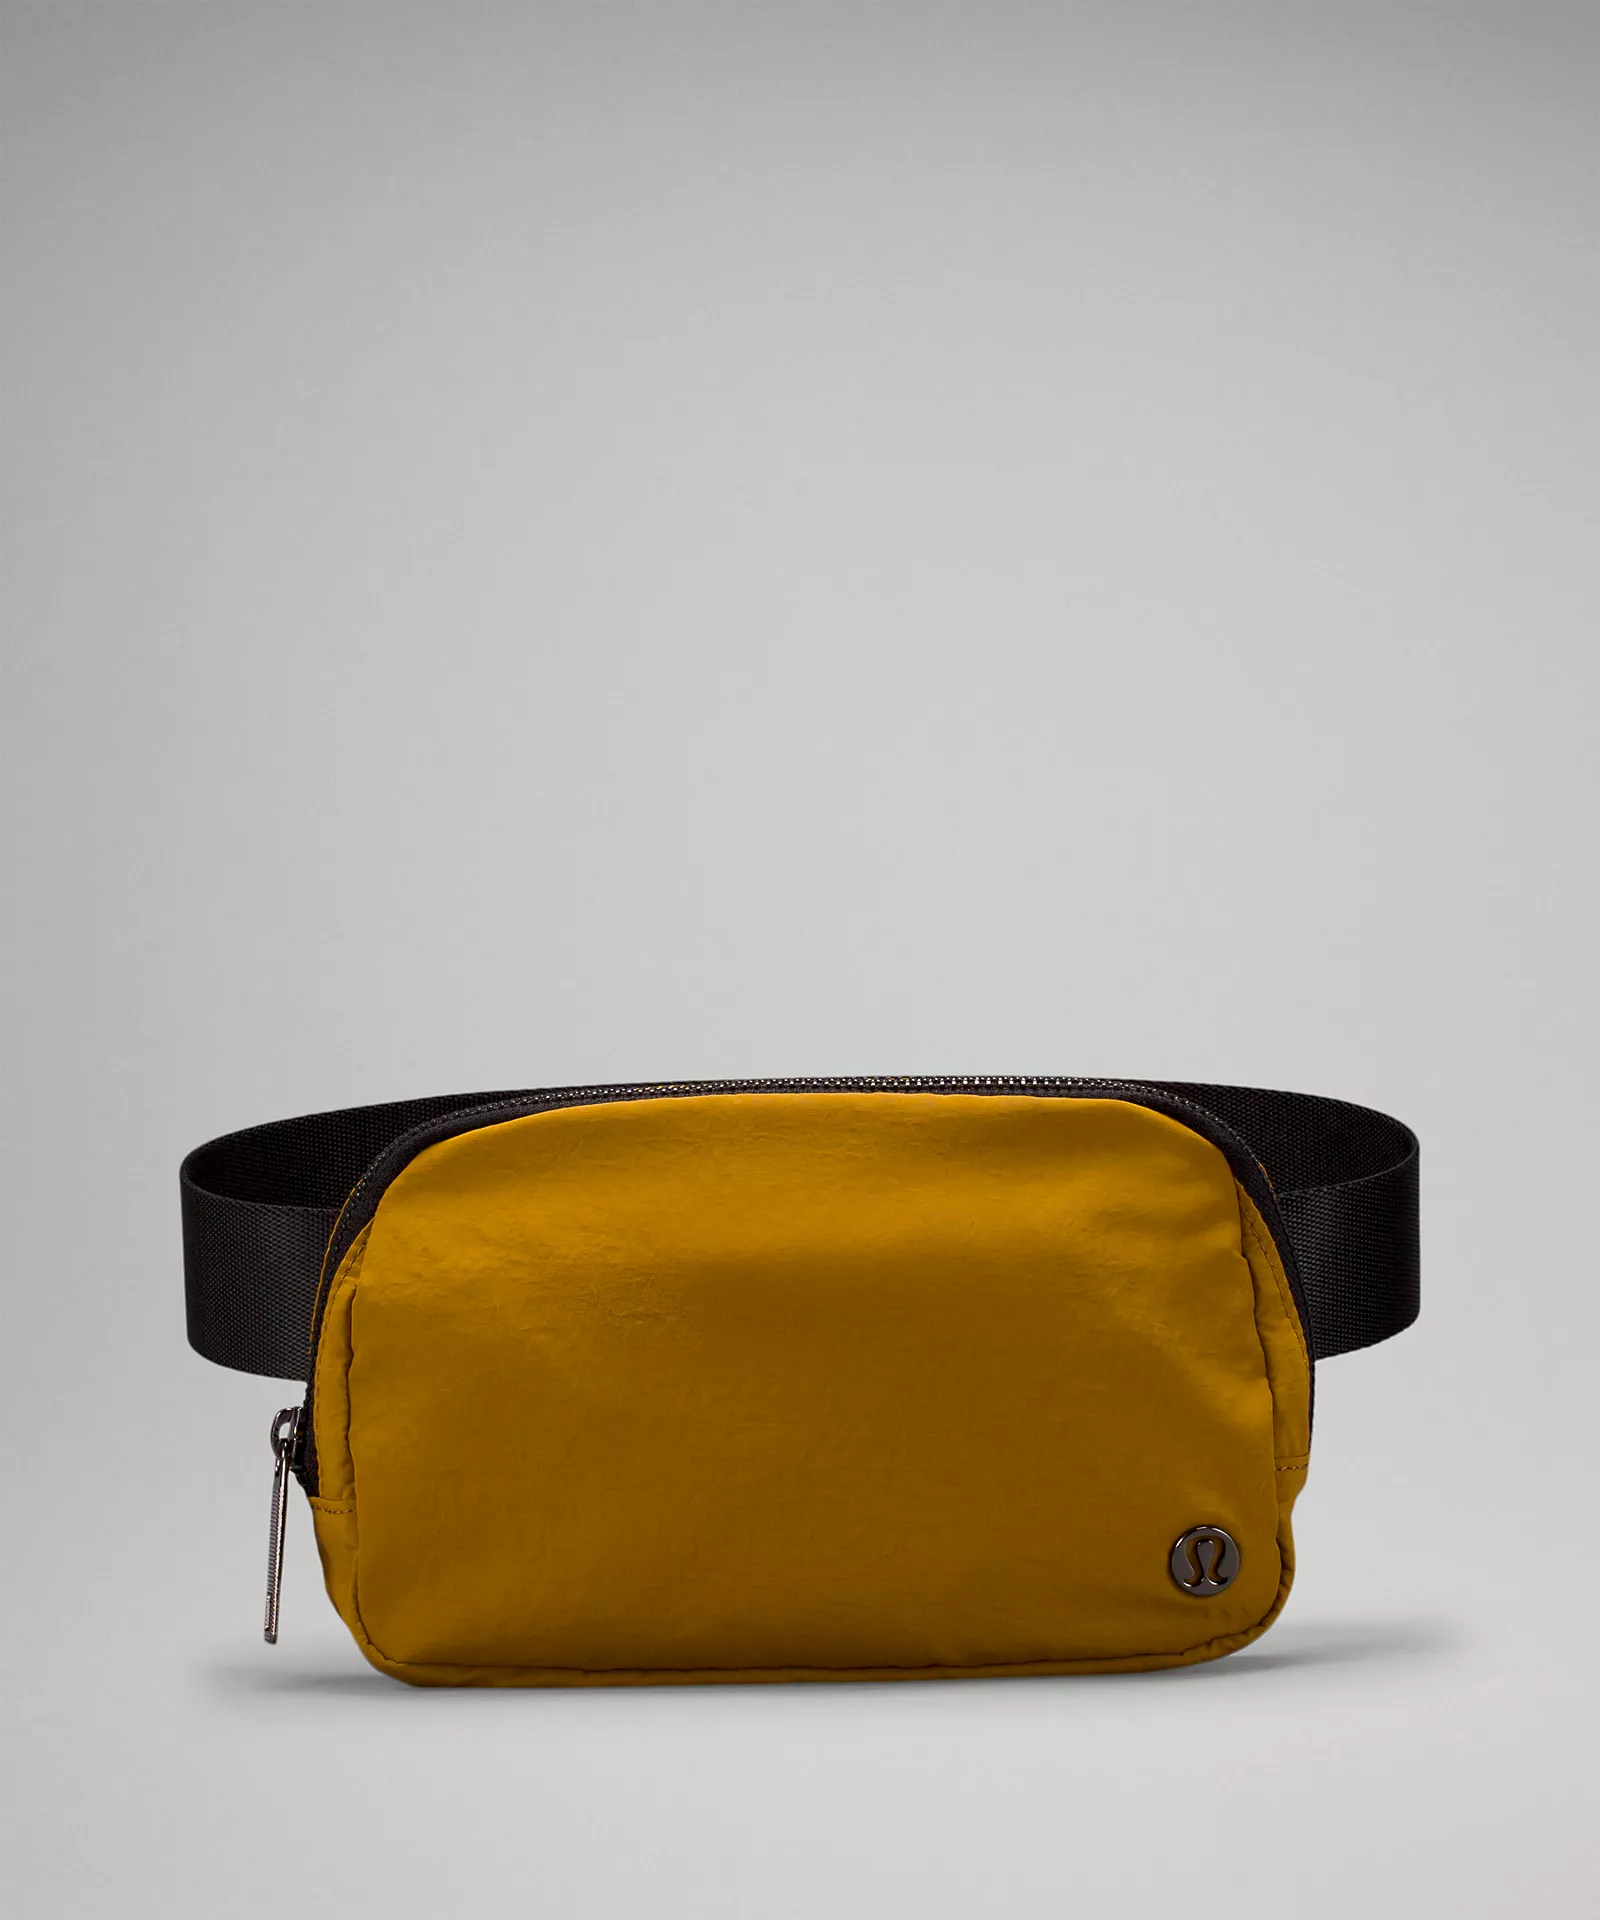 Mustard yellow belt bag with a black strap.